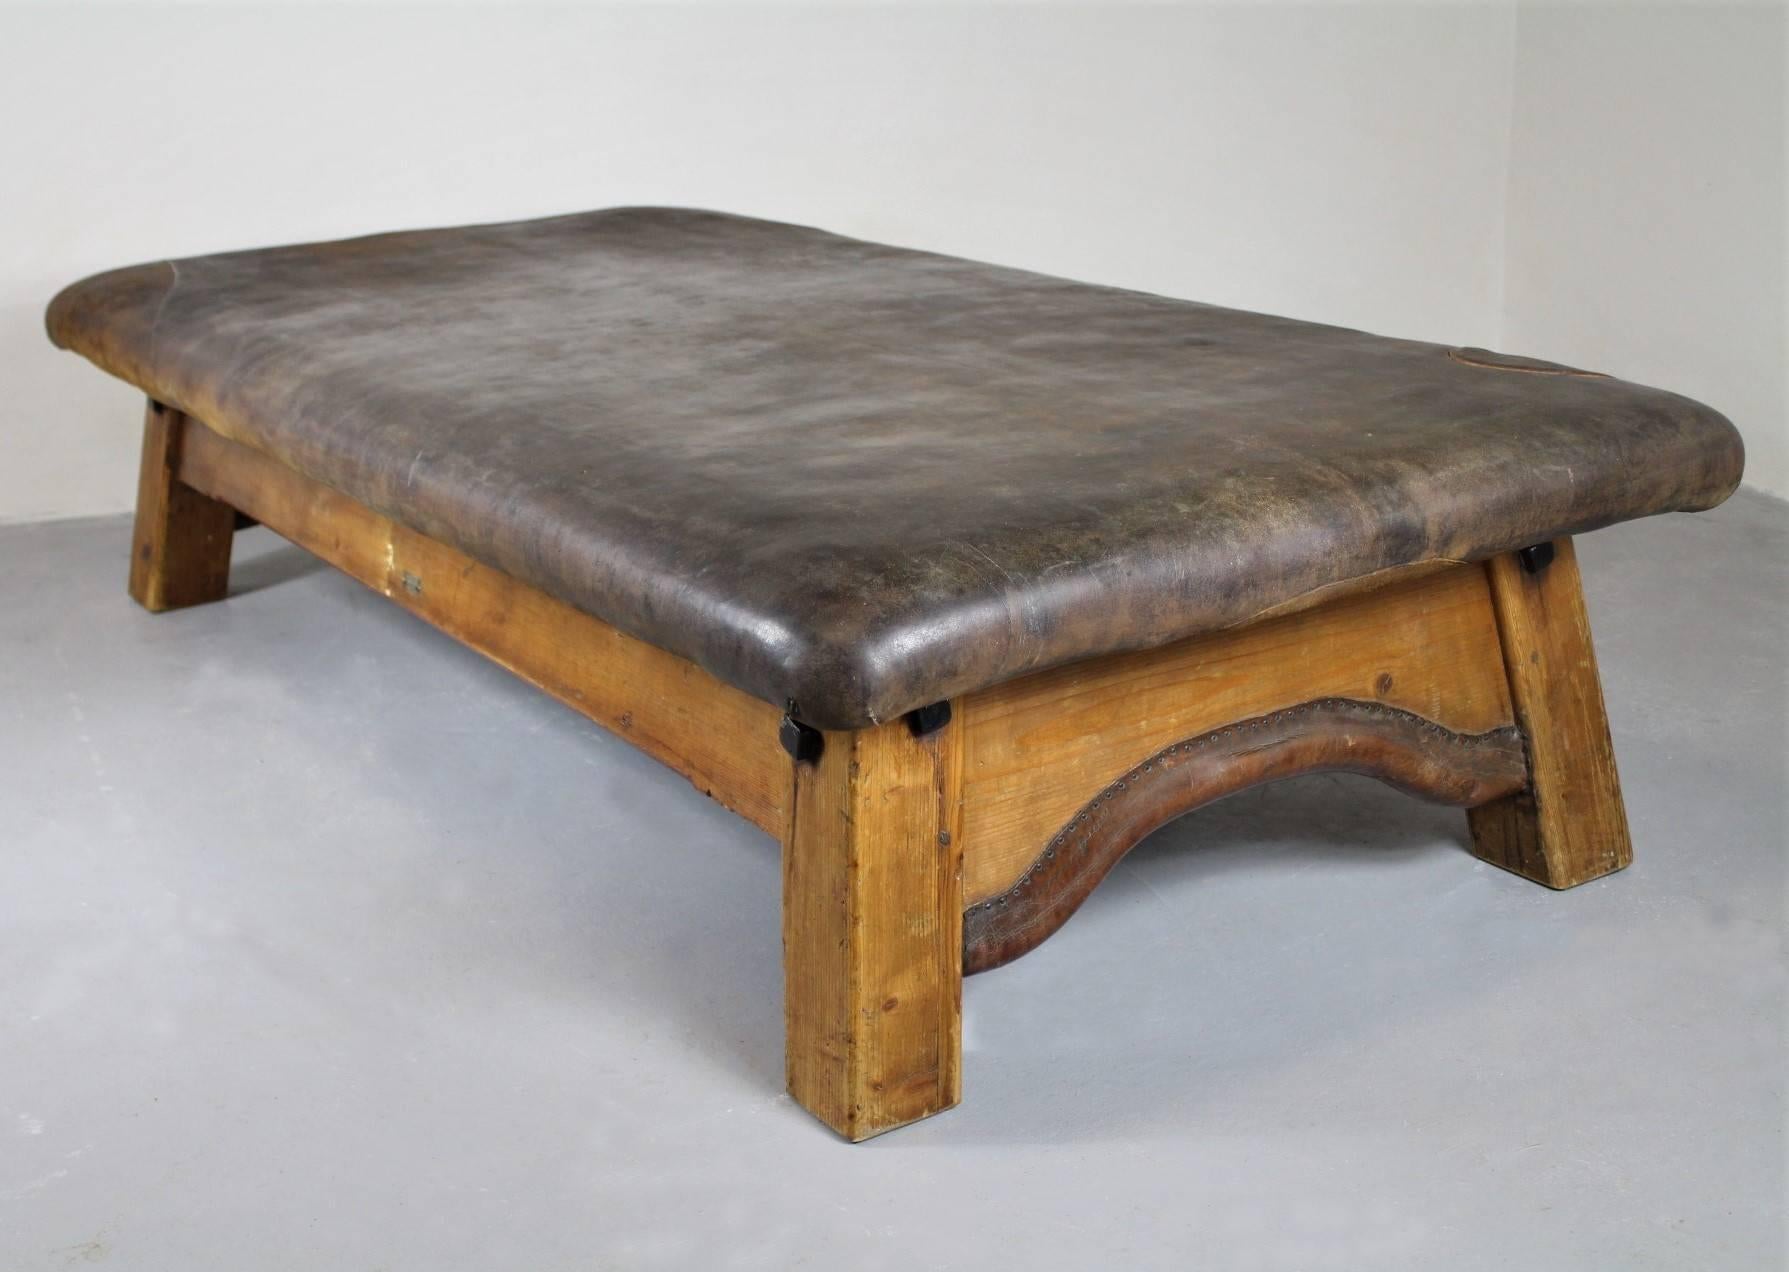 Rare leather gym table made in the middle of the19th century by J. Plaschkowitz in Vienna, Austria. The Plaschkowitz factory was founded in 1848. This gym table is no six of the series produced. It is built in a simple but solid way, joined by big